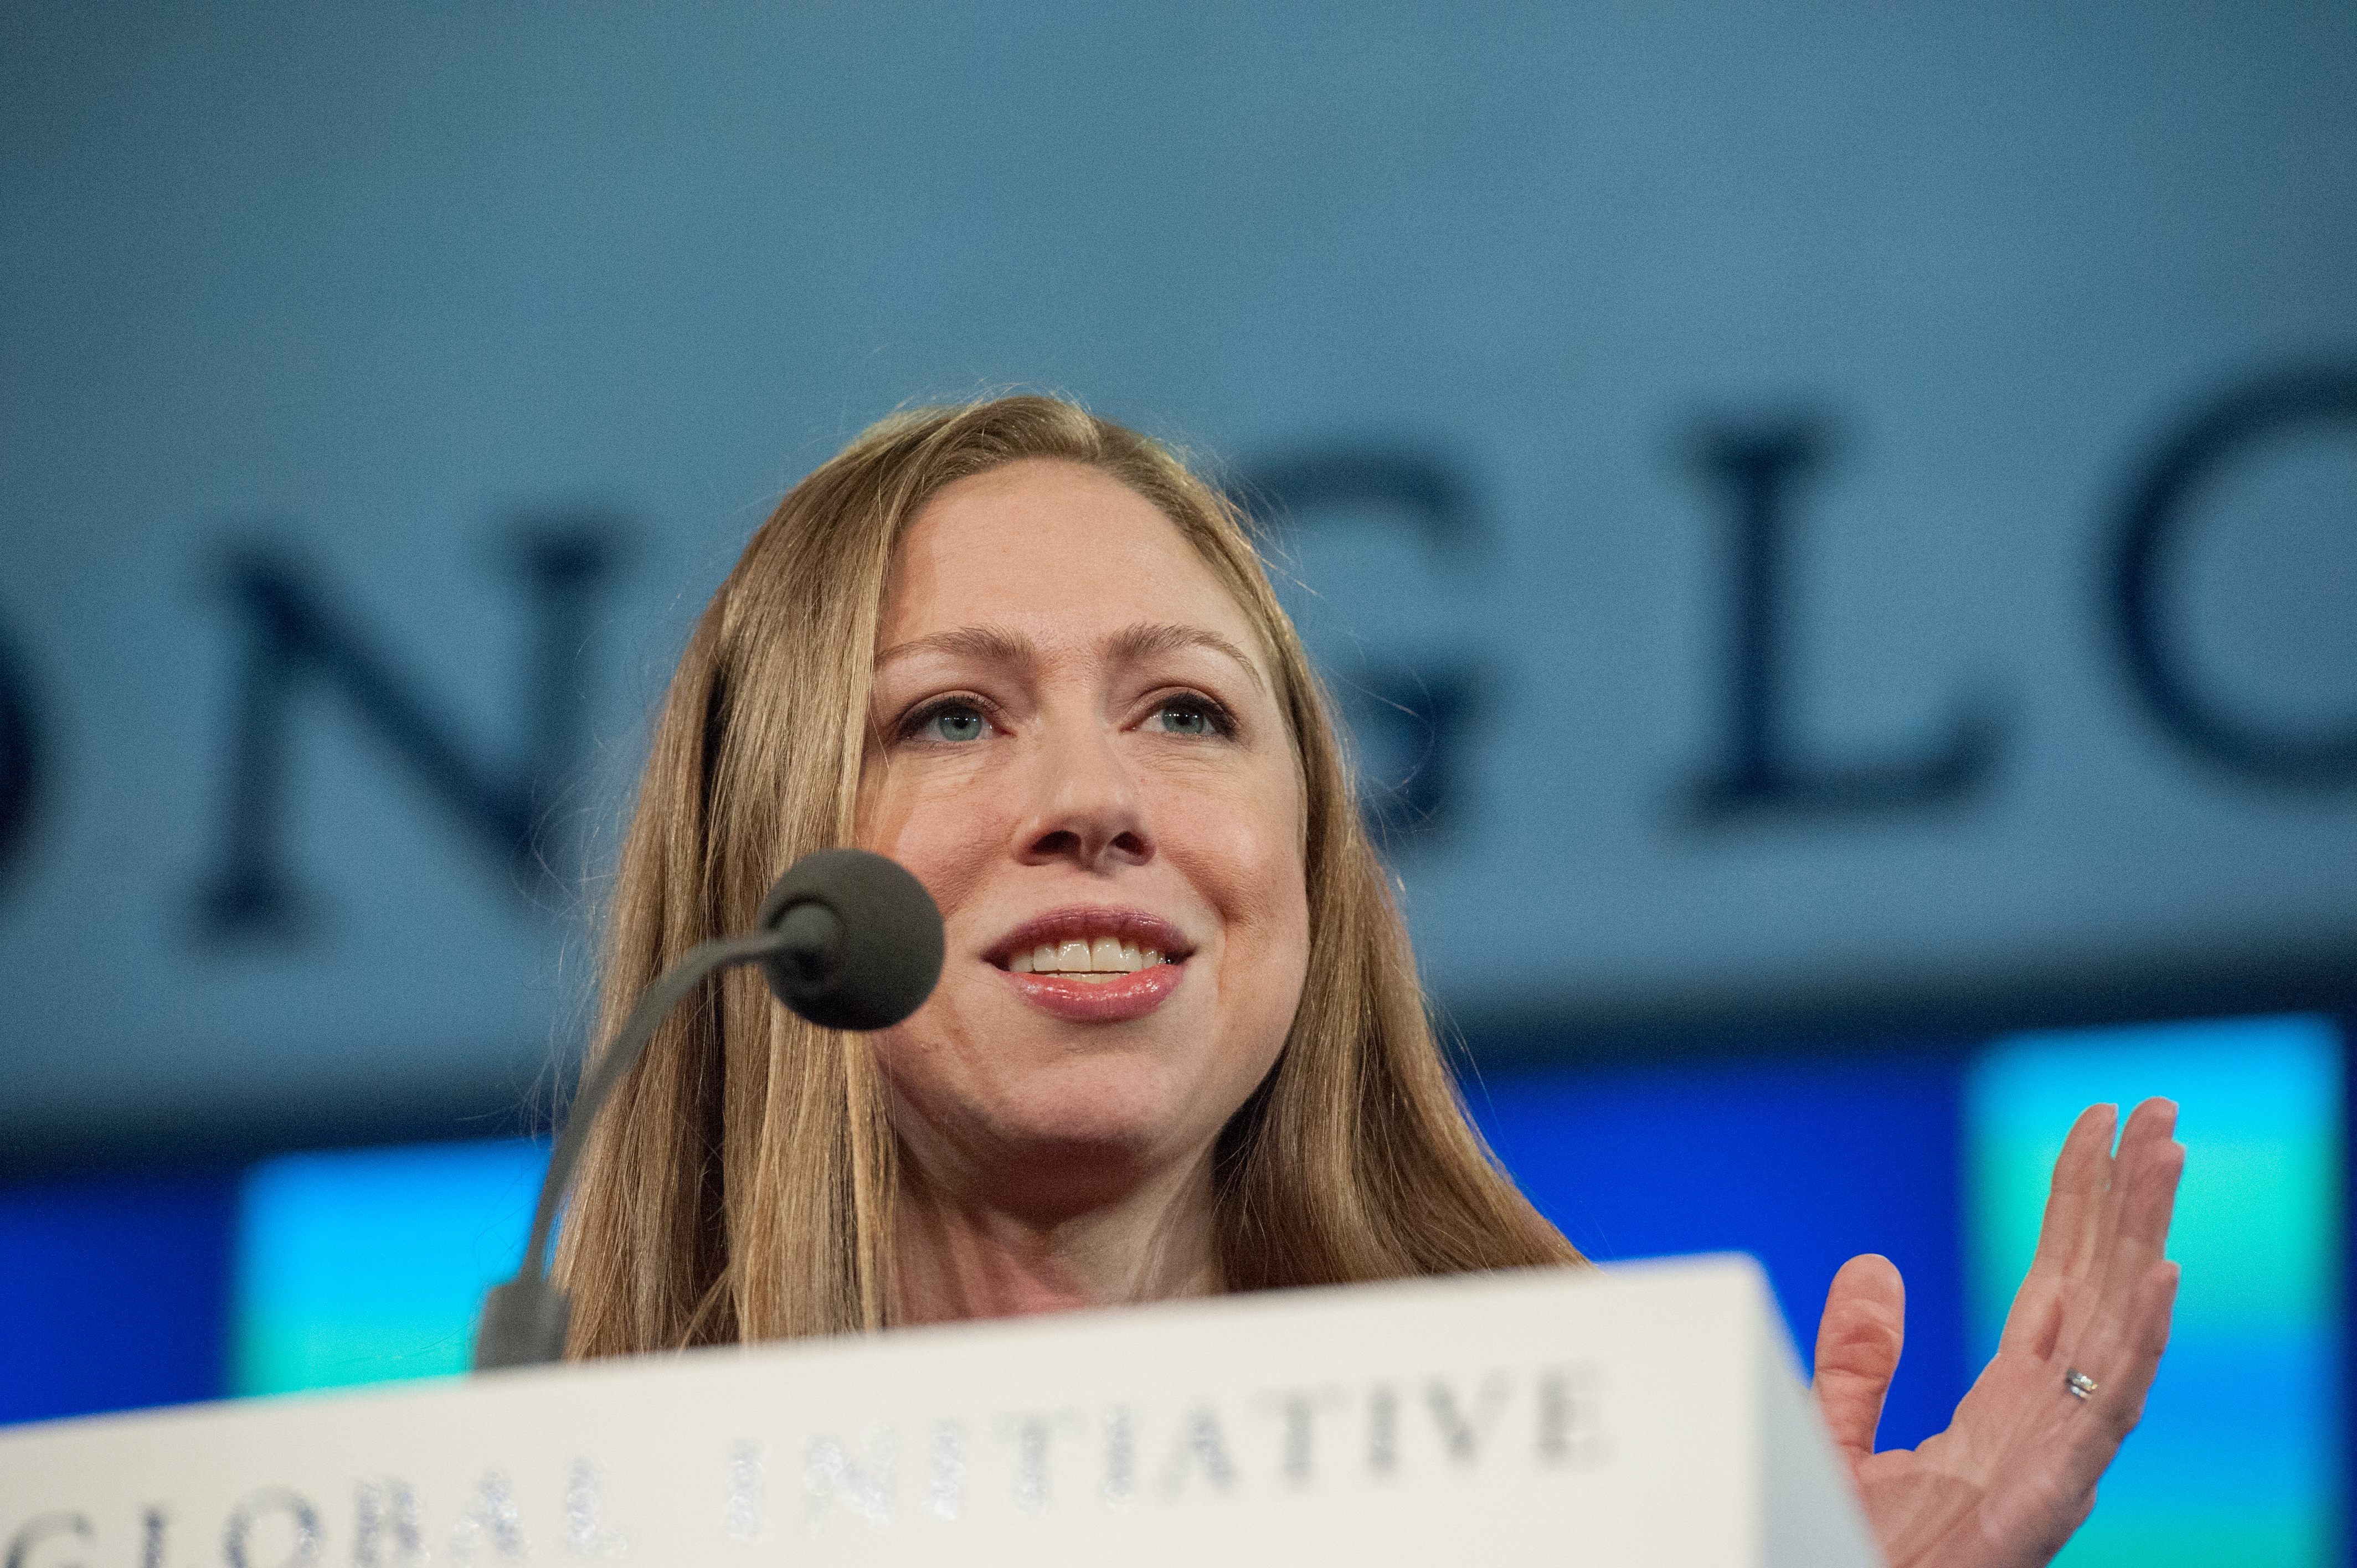 Chelsea Clinton delivers a speech during the annual Clinton Global Initiative on September 21, 2016 in New York City.